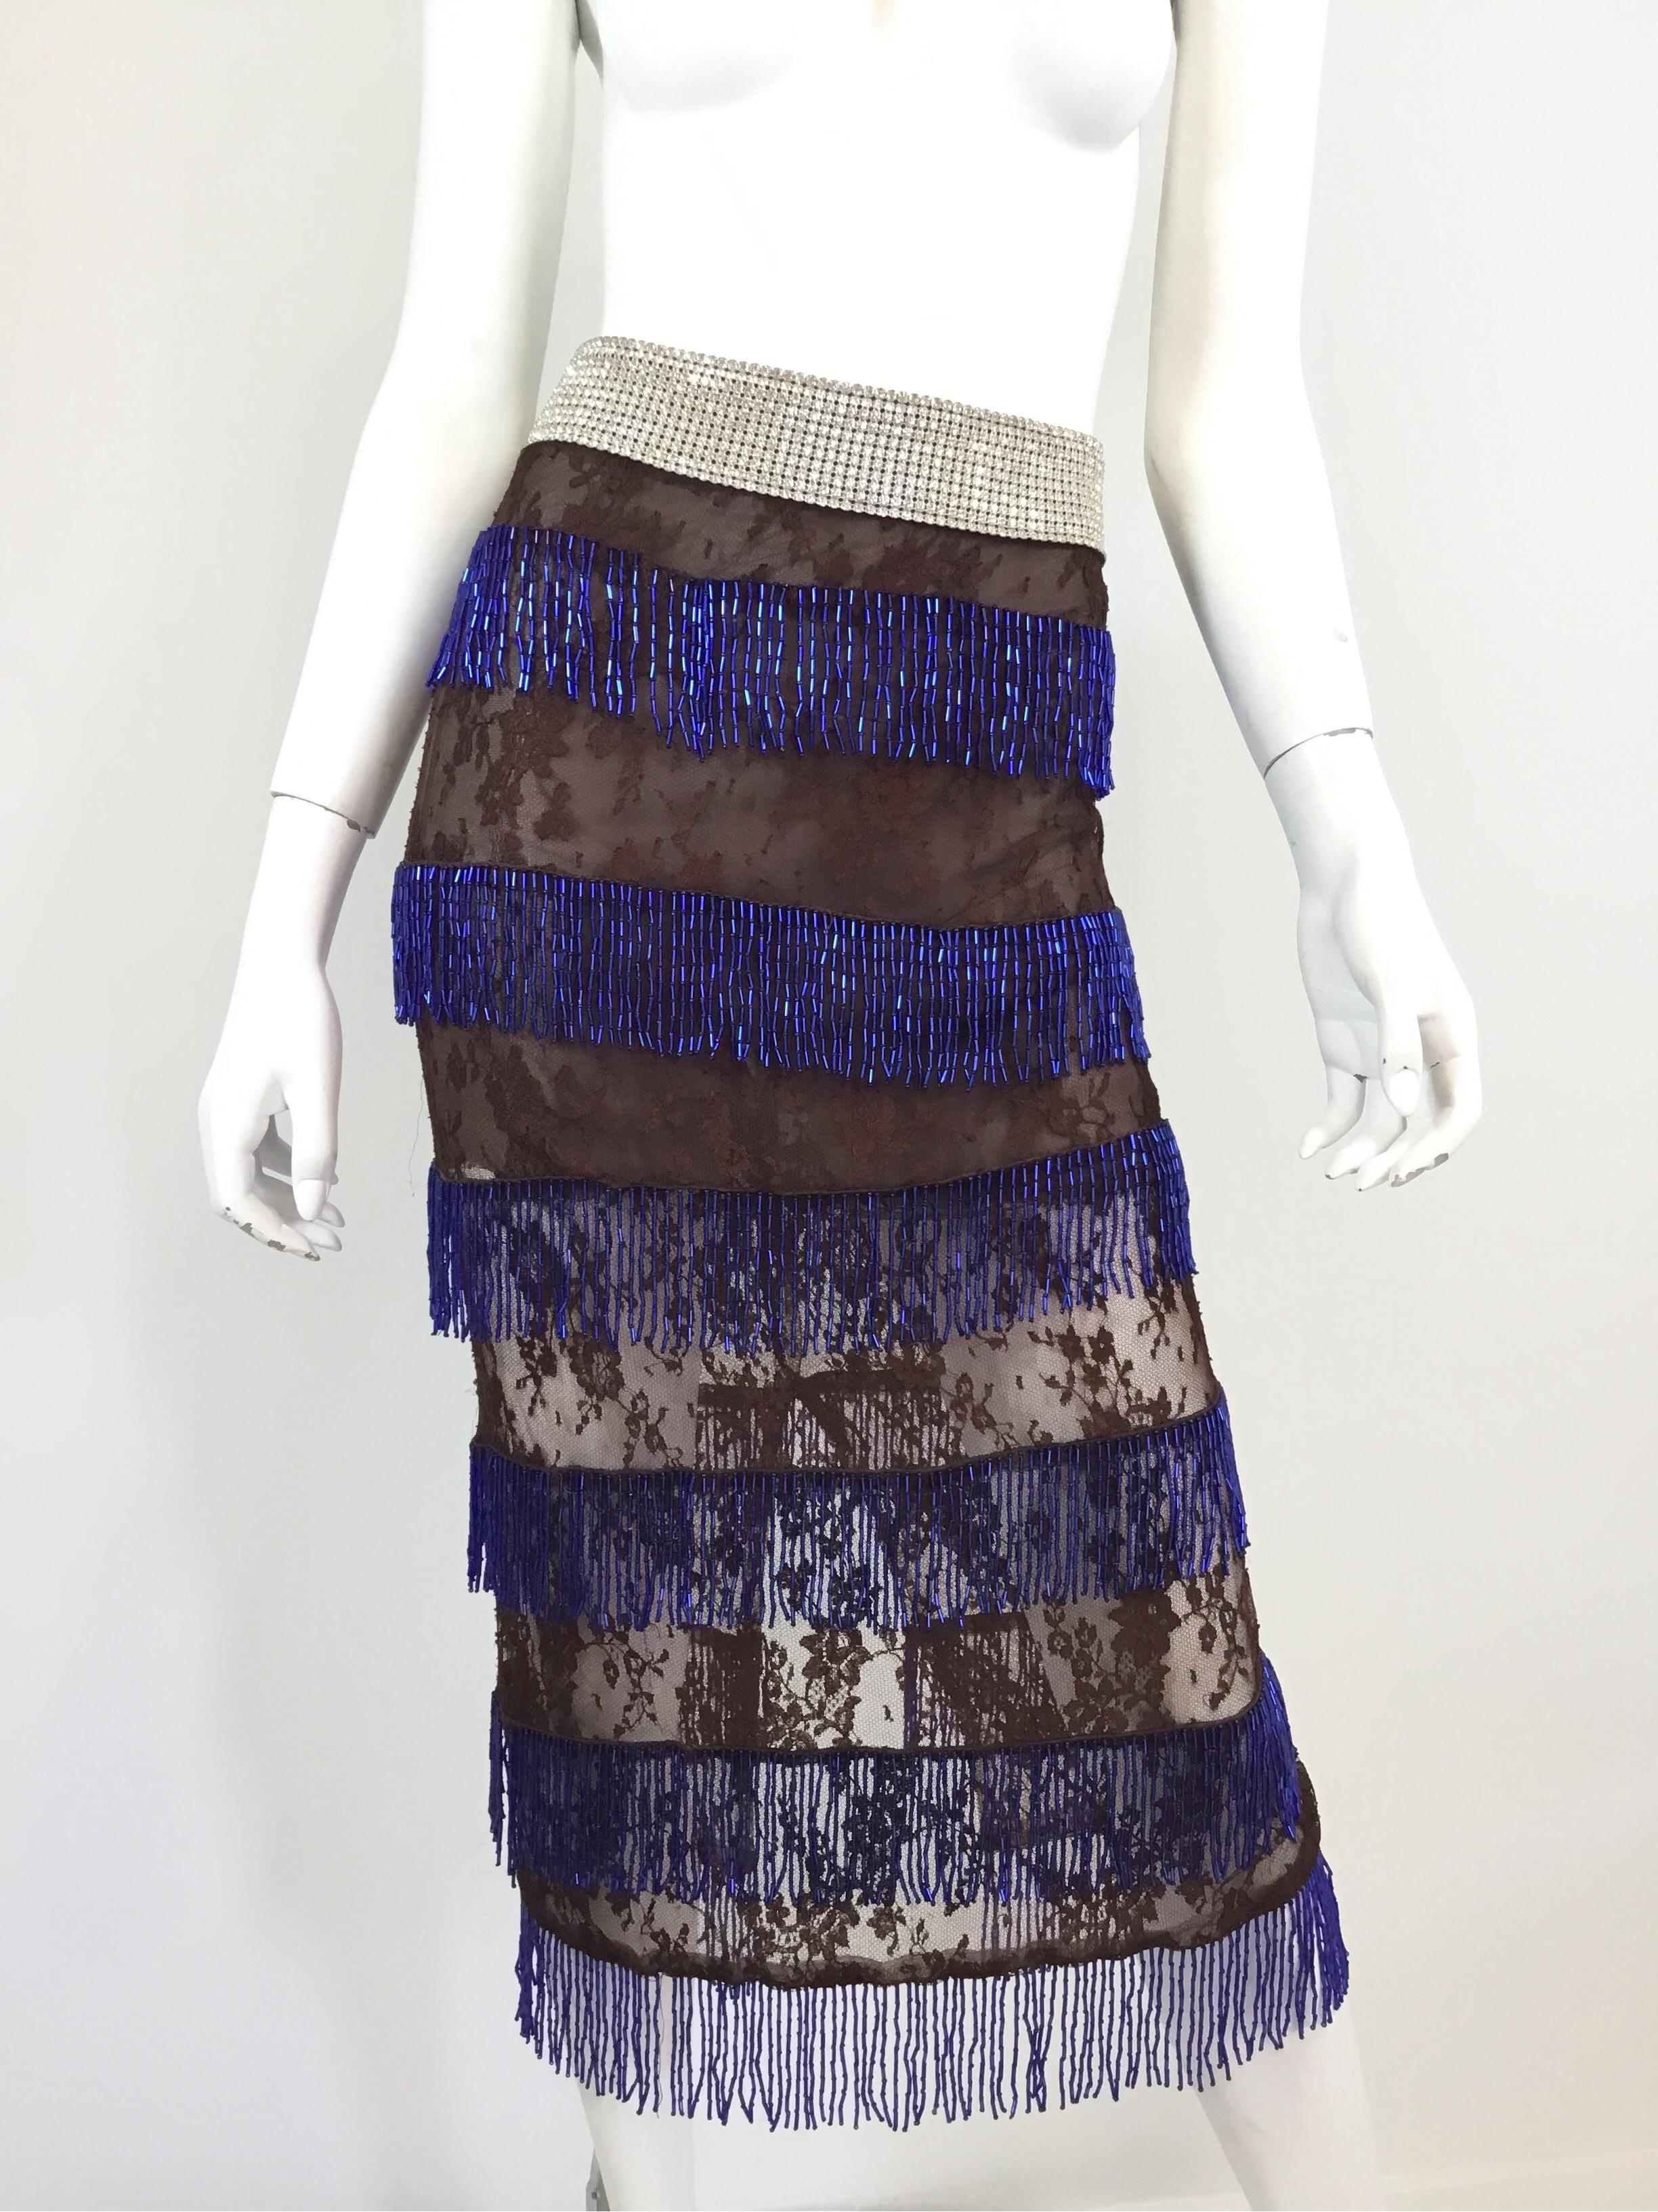 Dolce & Gabbana Brown lace skirt with a rhinestone encrusted waistband and blue dangling beadwork. Skirt has a back zipper closure. Labeled Size 42, viscose and nylon blend, full lining. Made in Italy.

Measurements:
Waist 31”, hips 34”, length 33”